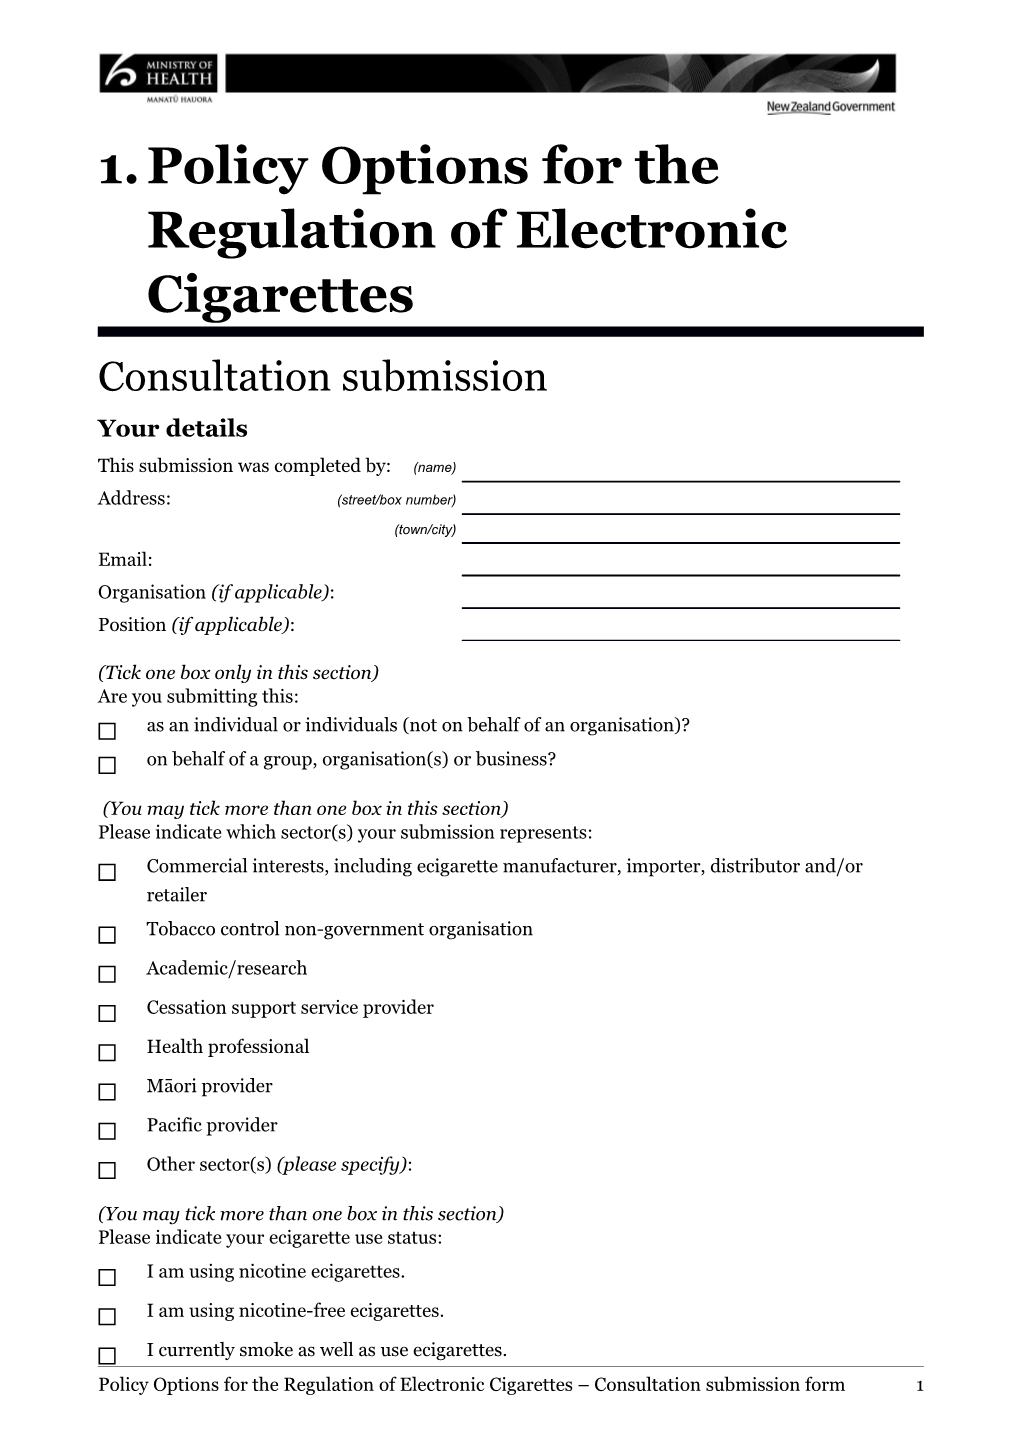 Policy Options for the Regulation of Electronic Cigarettes